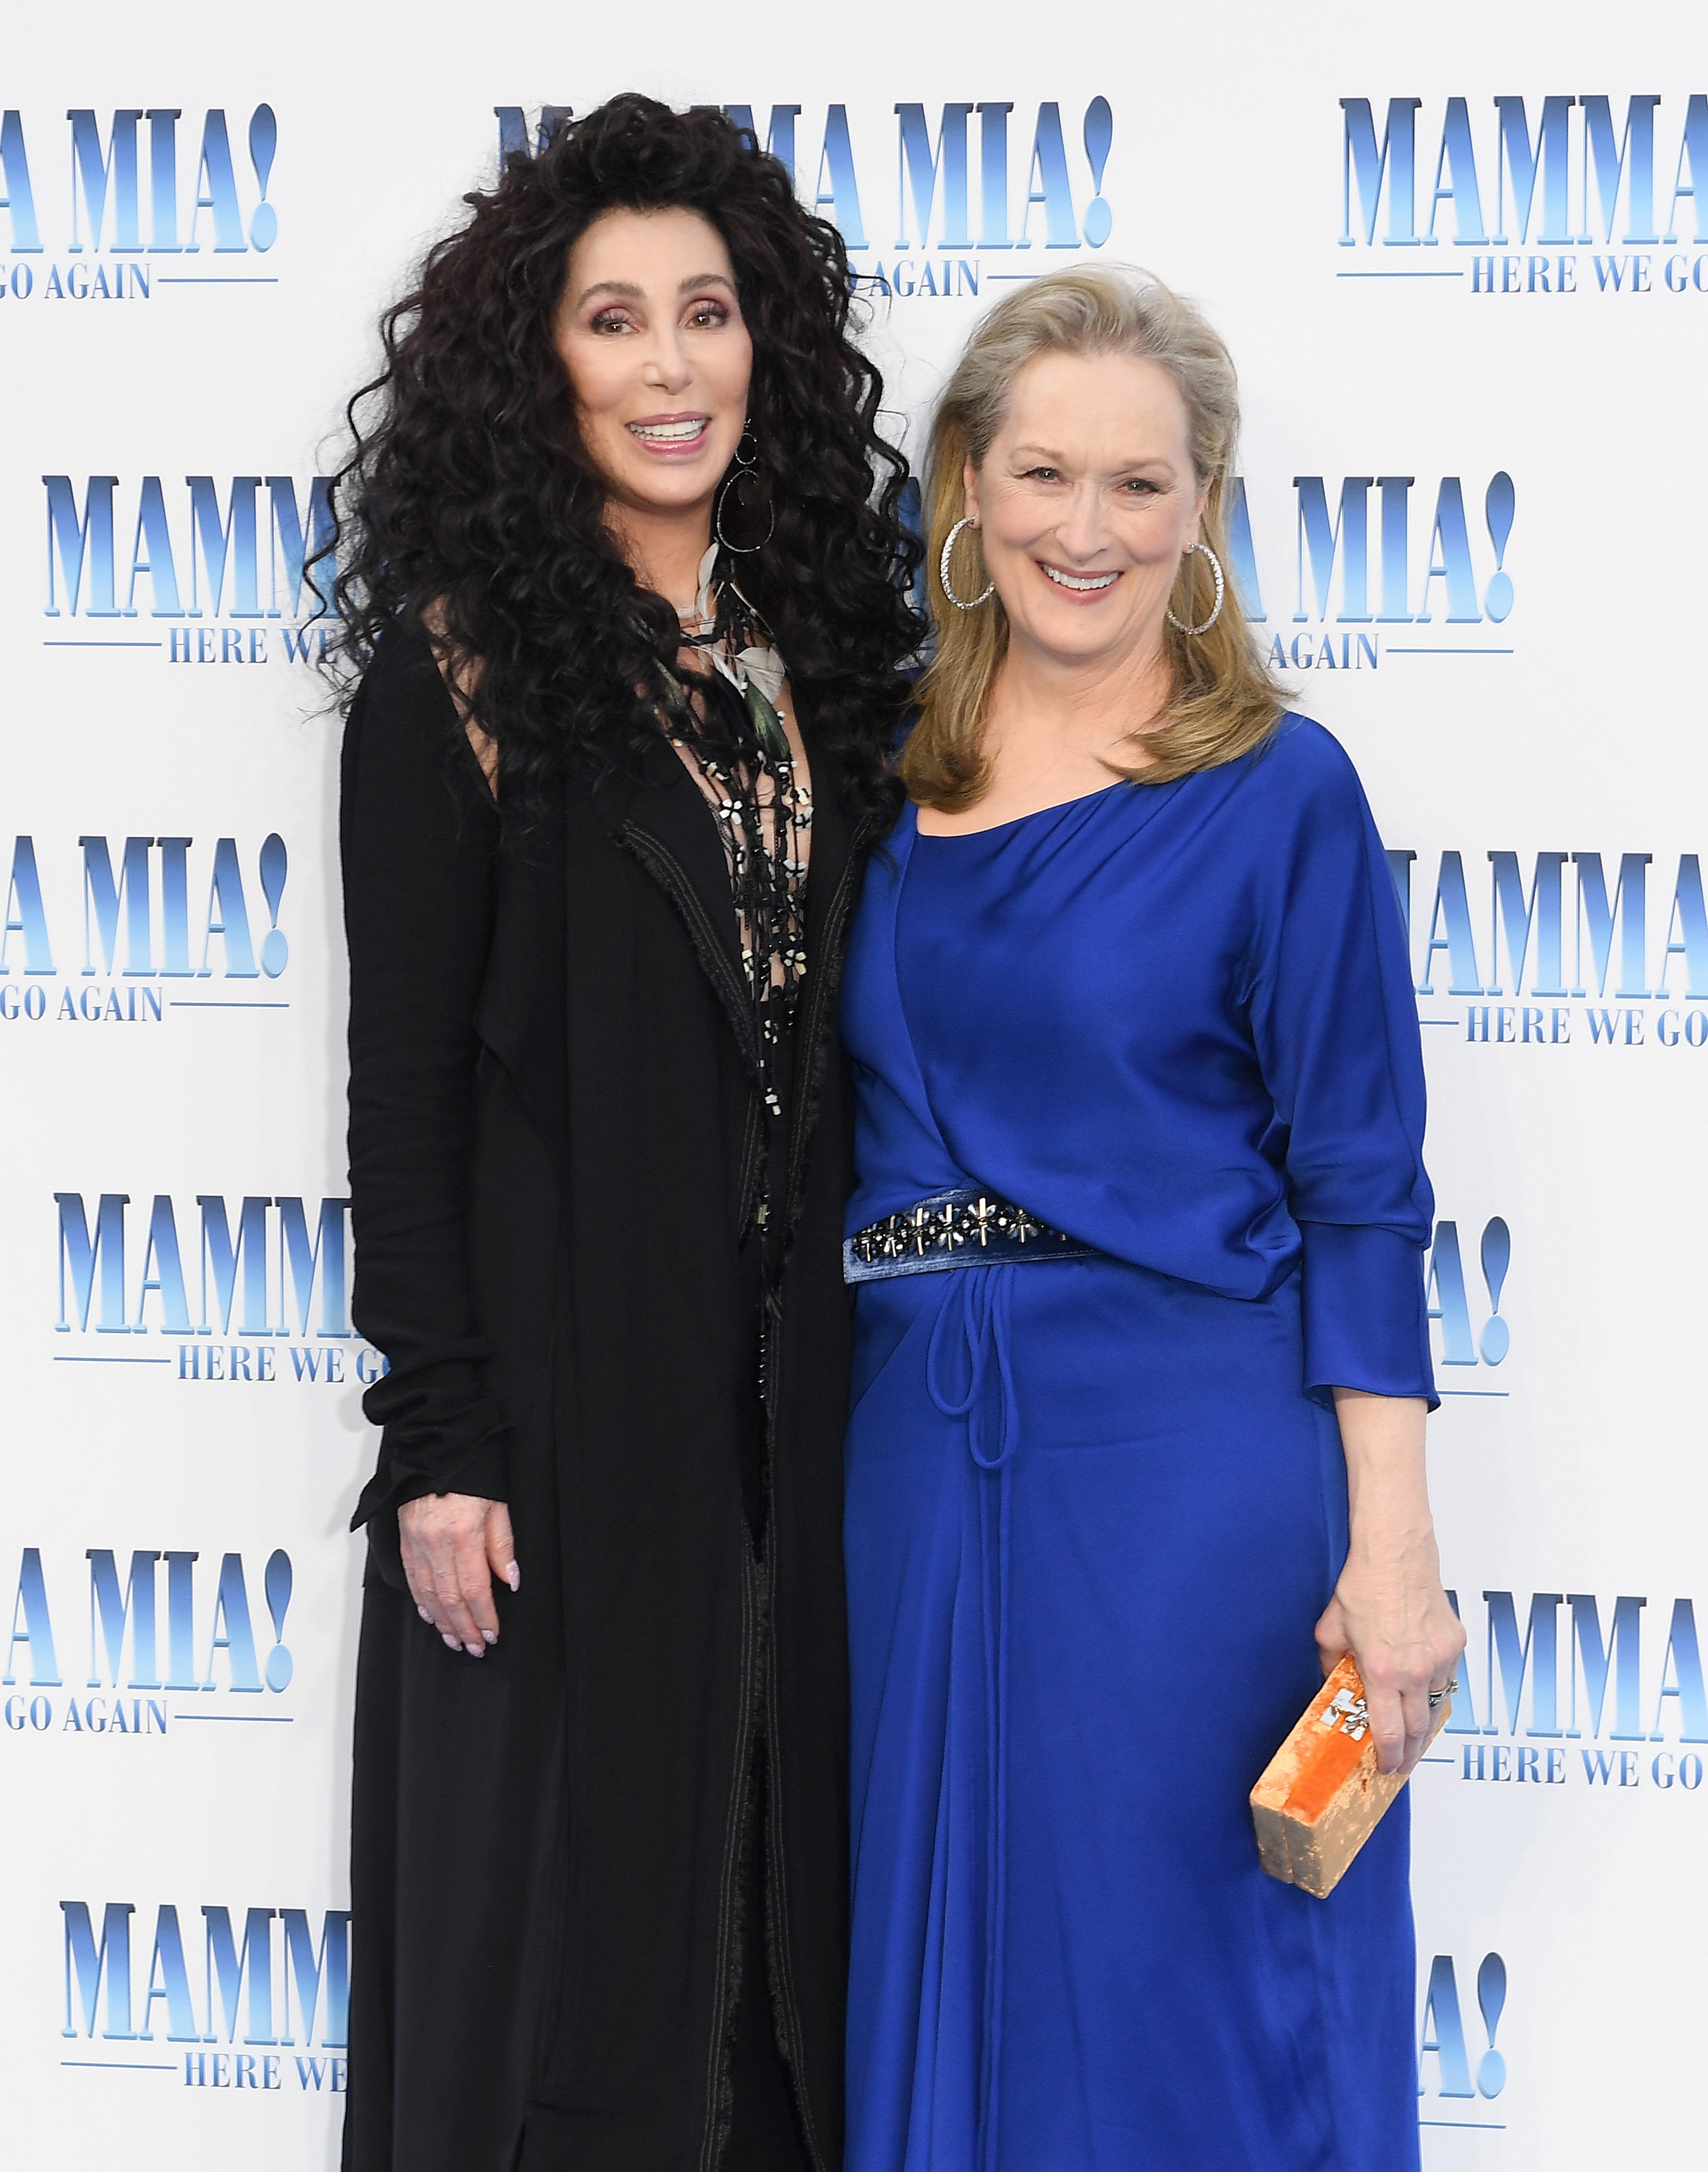 Everything You Need to Know about Cher and Meryl Streep's Iconic